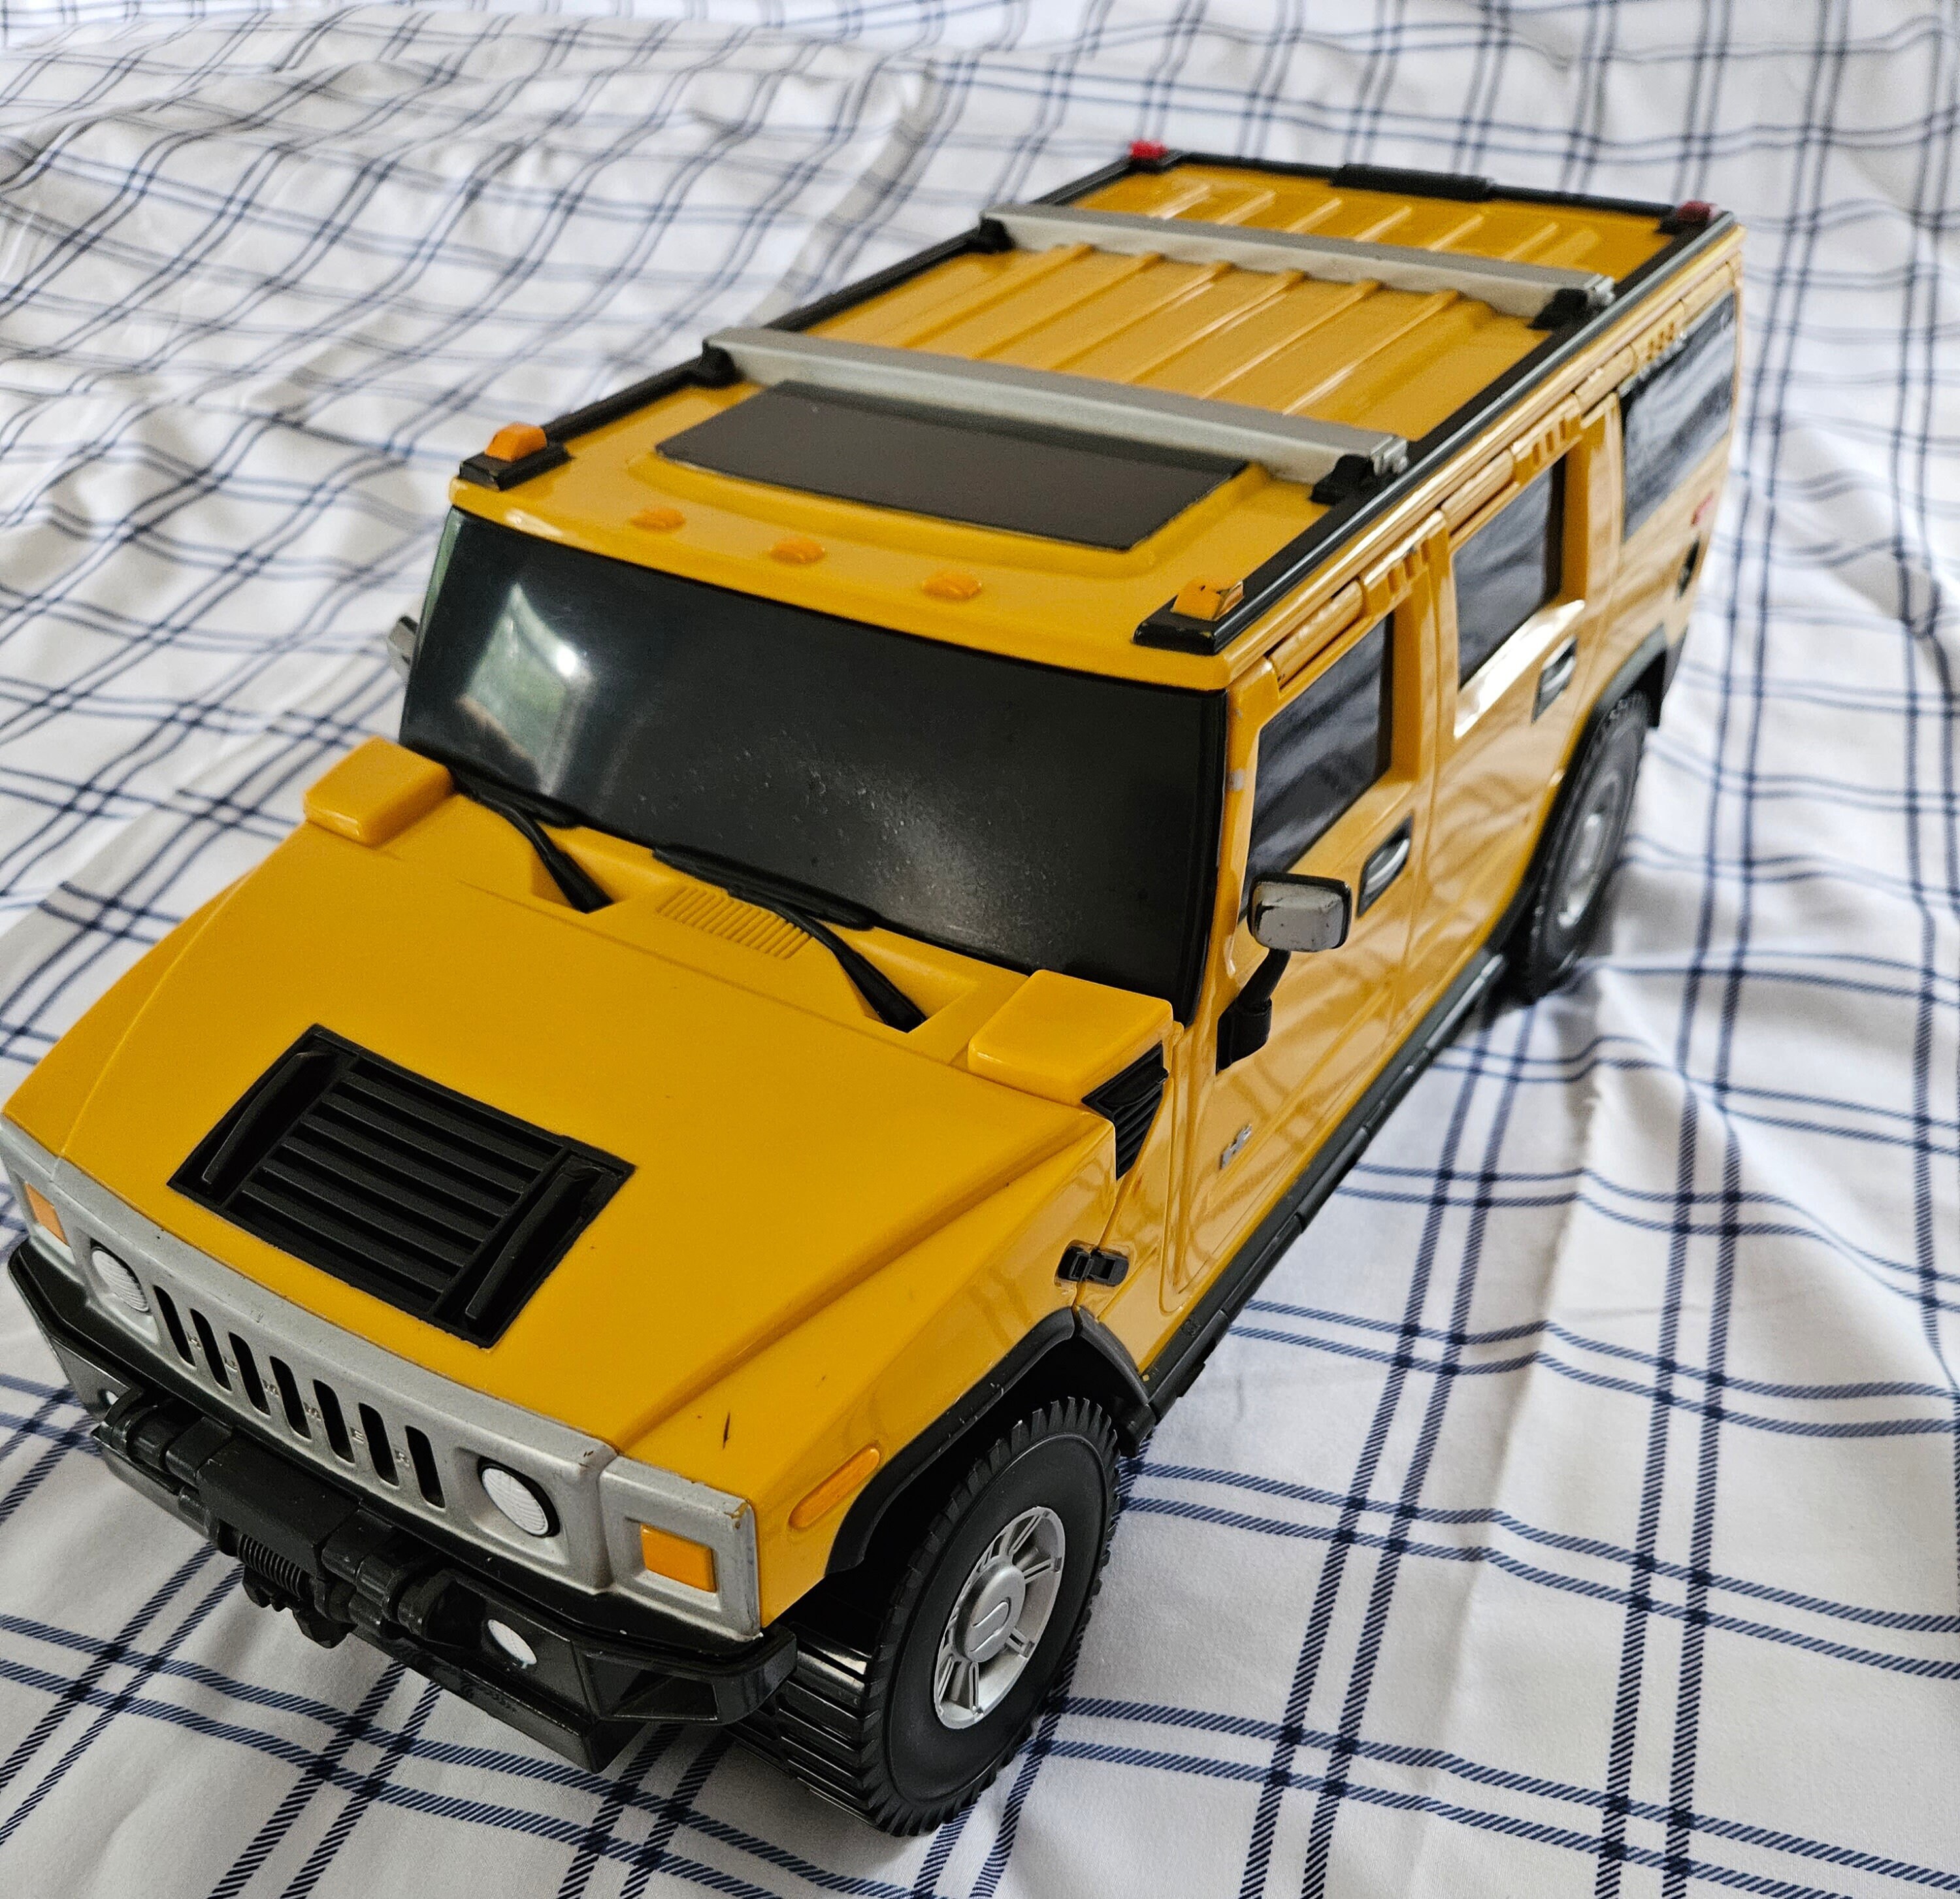 1:18 SCALE MAISTO HUMMER H2 SUV YELLOW SPECIAL EDITION DIECAST MODEL  COLLECTION